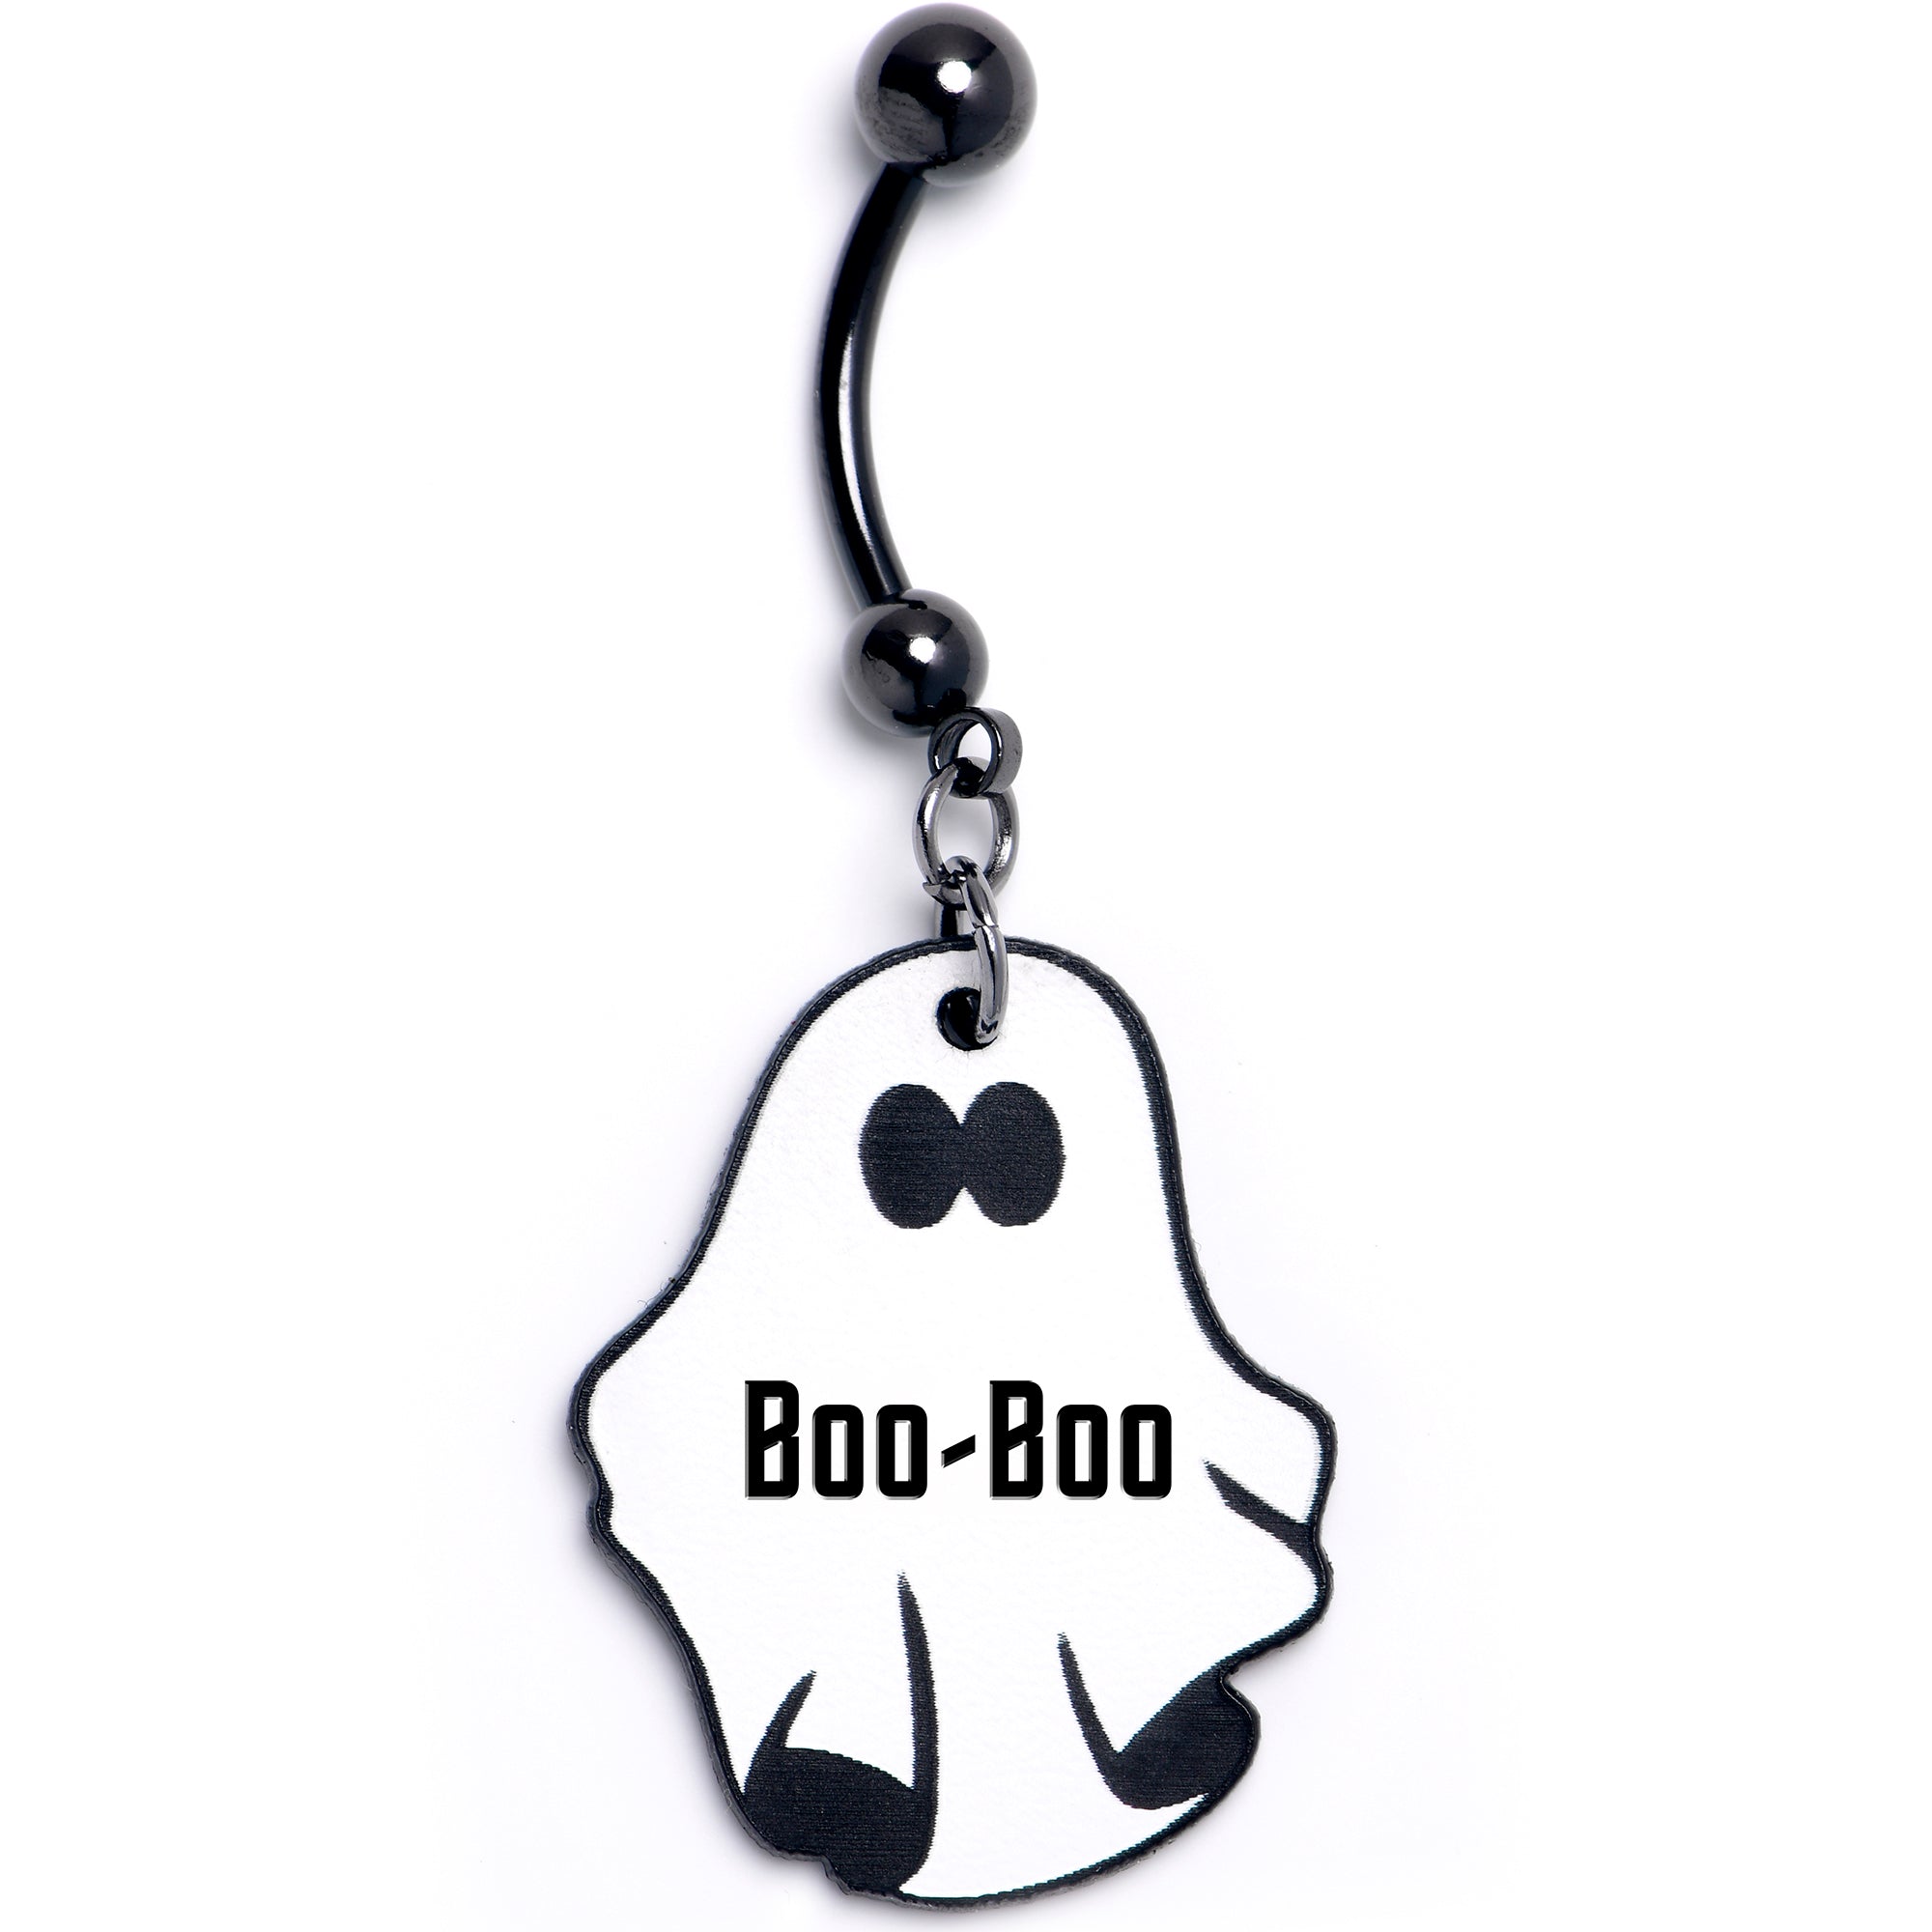 Custom Black Halloween Ghost Personalized Dangle Belly Ring